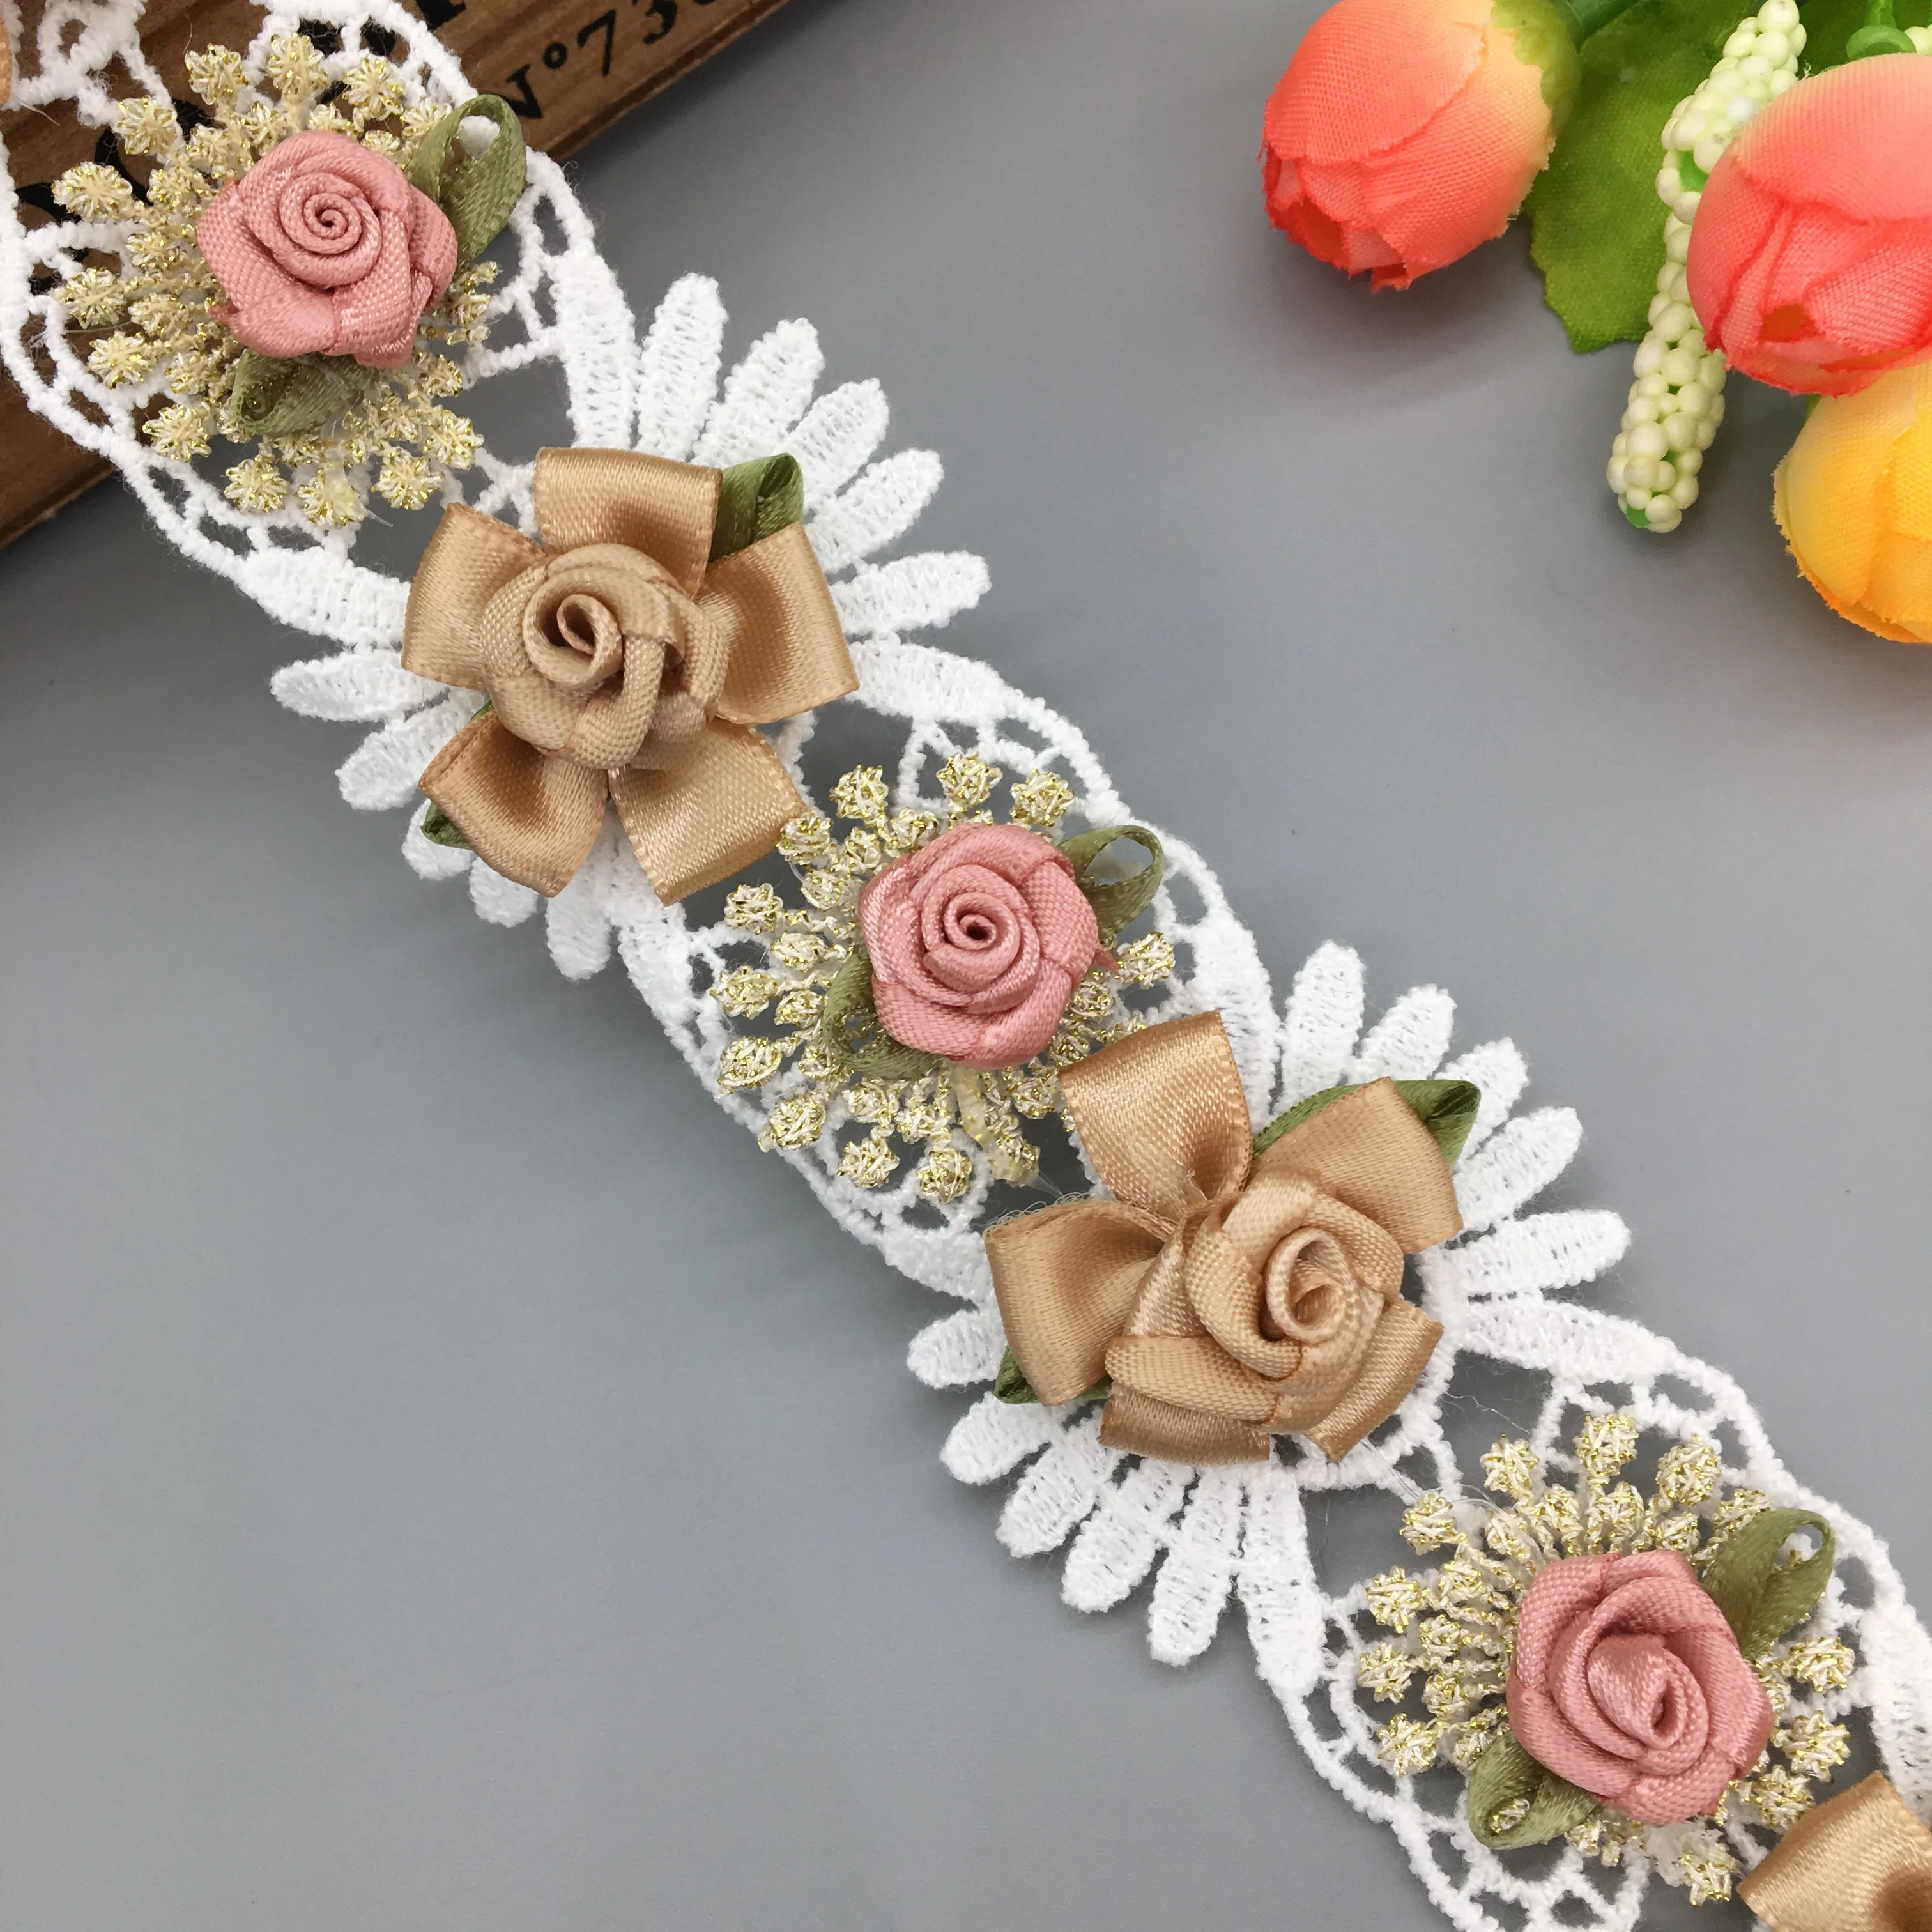 

1 yard Eyelash Rose Flower Gold Handmade Embroidered Lace Trim Ribbon African Laces Fabric Vintage Wedding Applique Sewing Craft